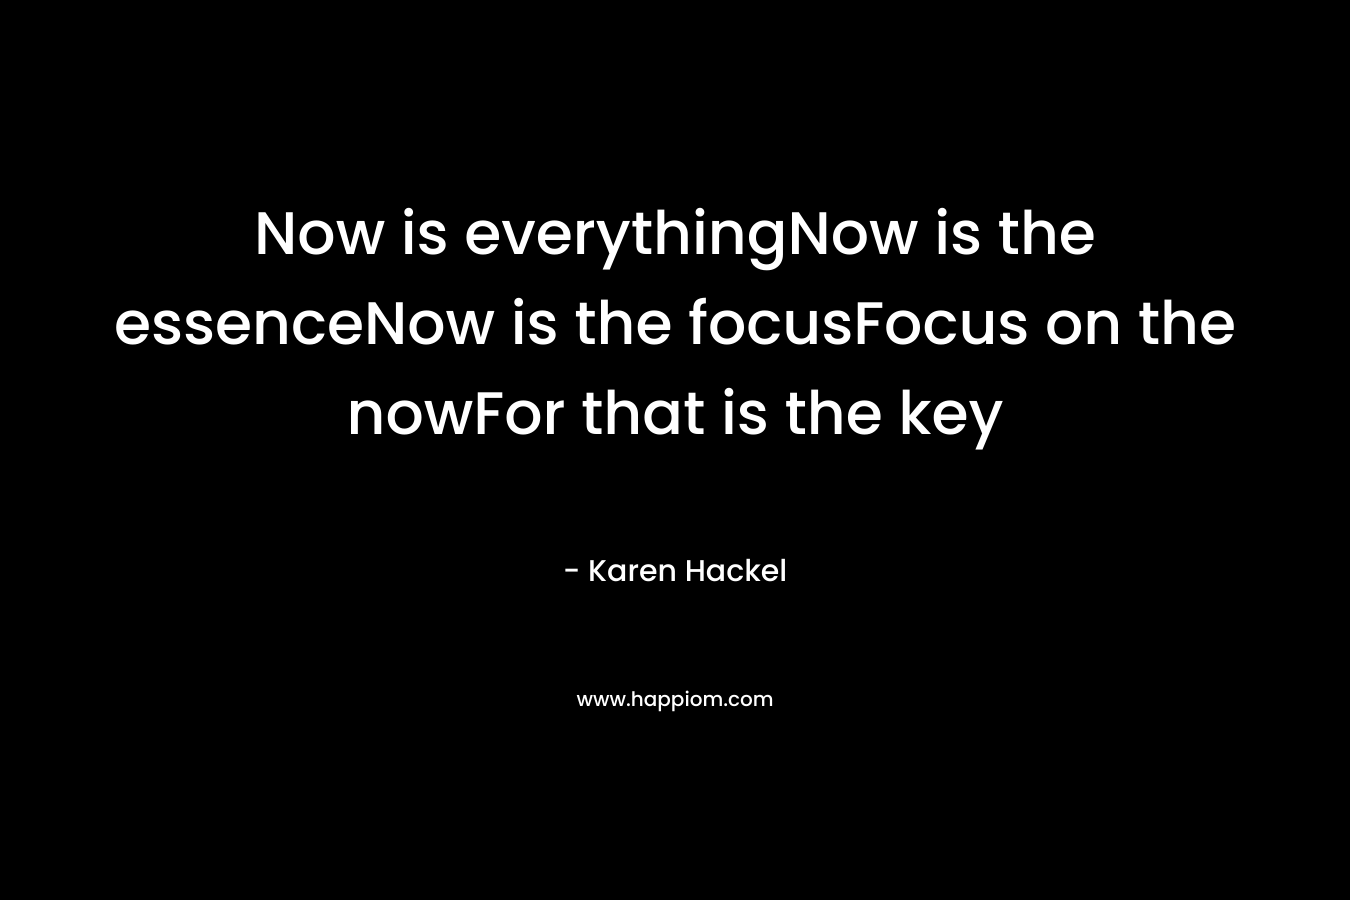 Now is everythingNow is the essenceNow is the focusFocus on the nowFor that is the key